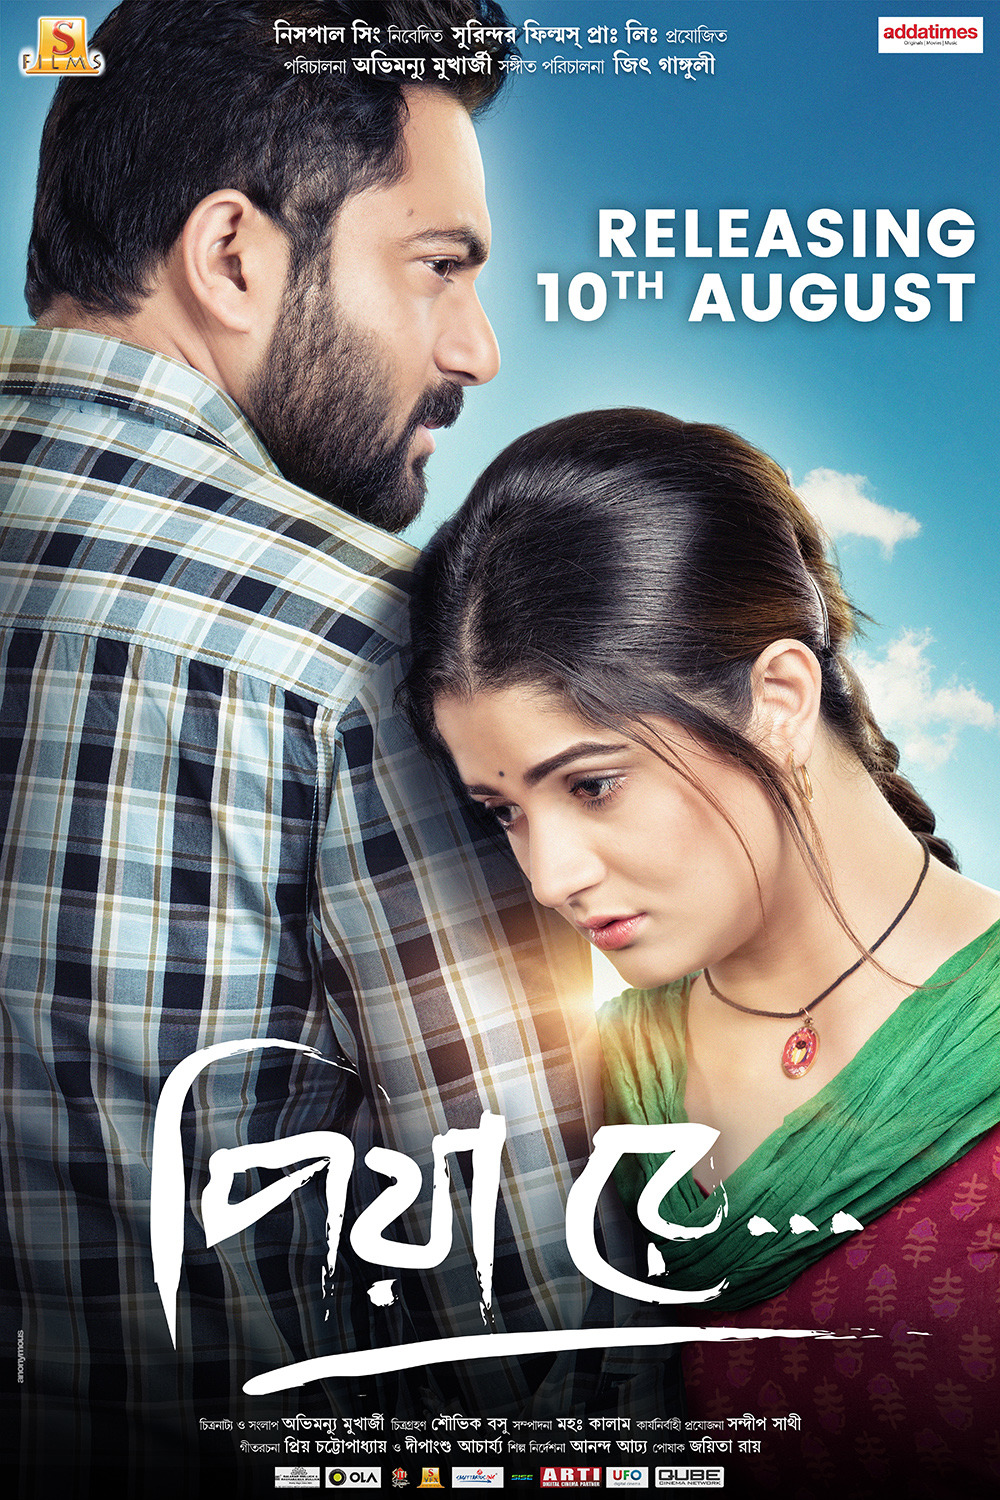 Extra Large Movie Poster Image for Piya Re (#4 of 4)